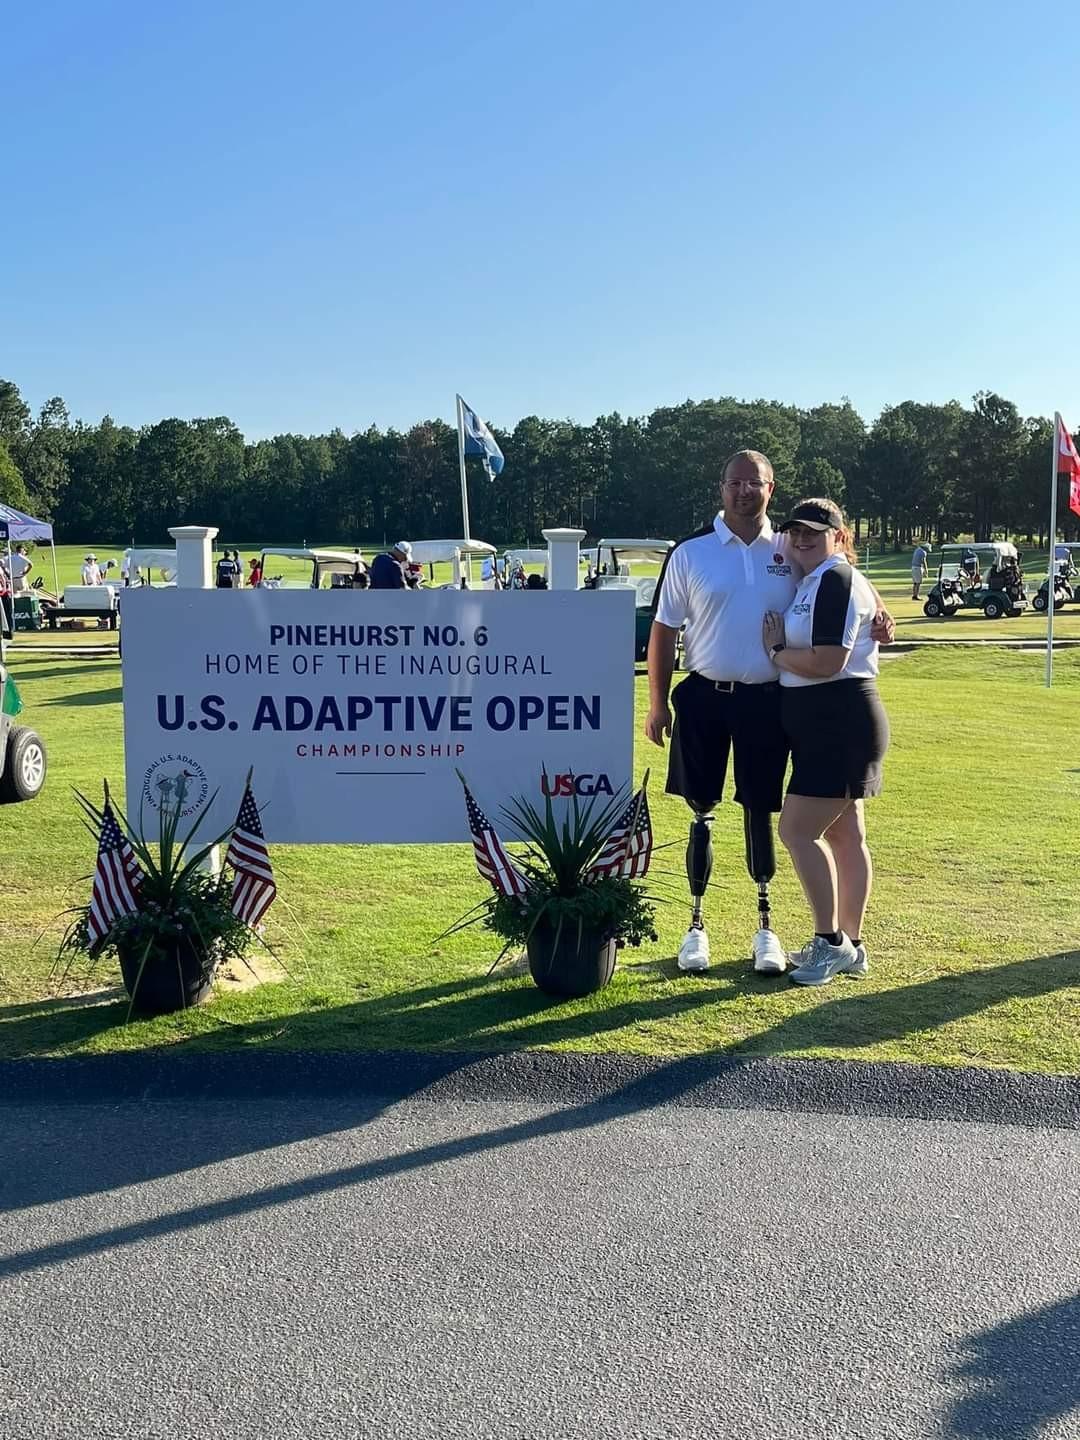 golfers posing next to sign